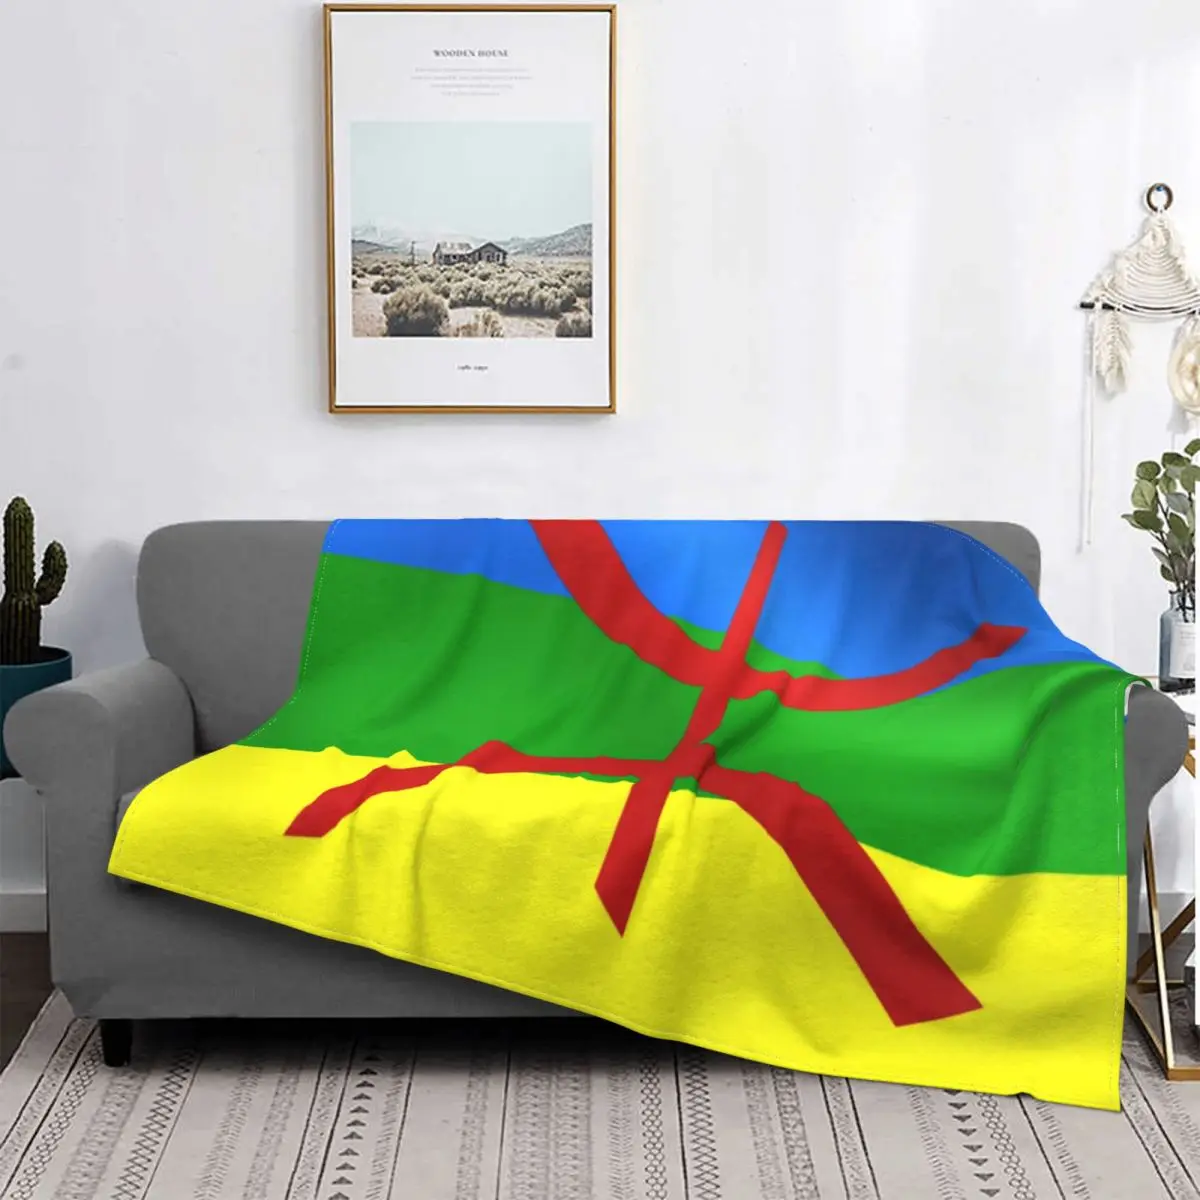 

Carpet Blanket 3D Printed Soft Flannel Fleece Warm Amazigh Bohemia Boho Throw Blankets for Travel Bed Couch Quilt